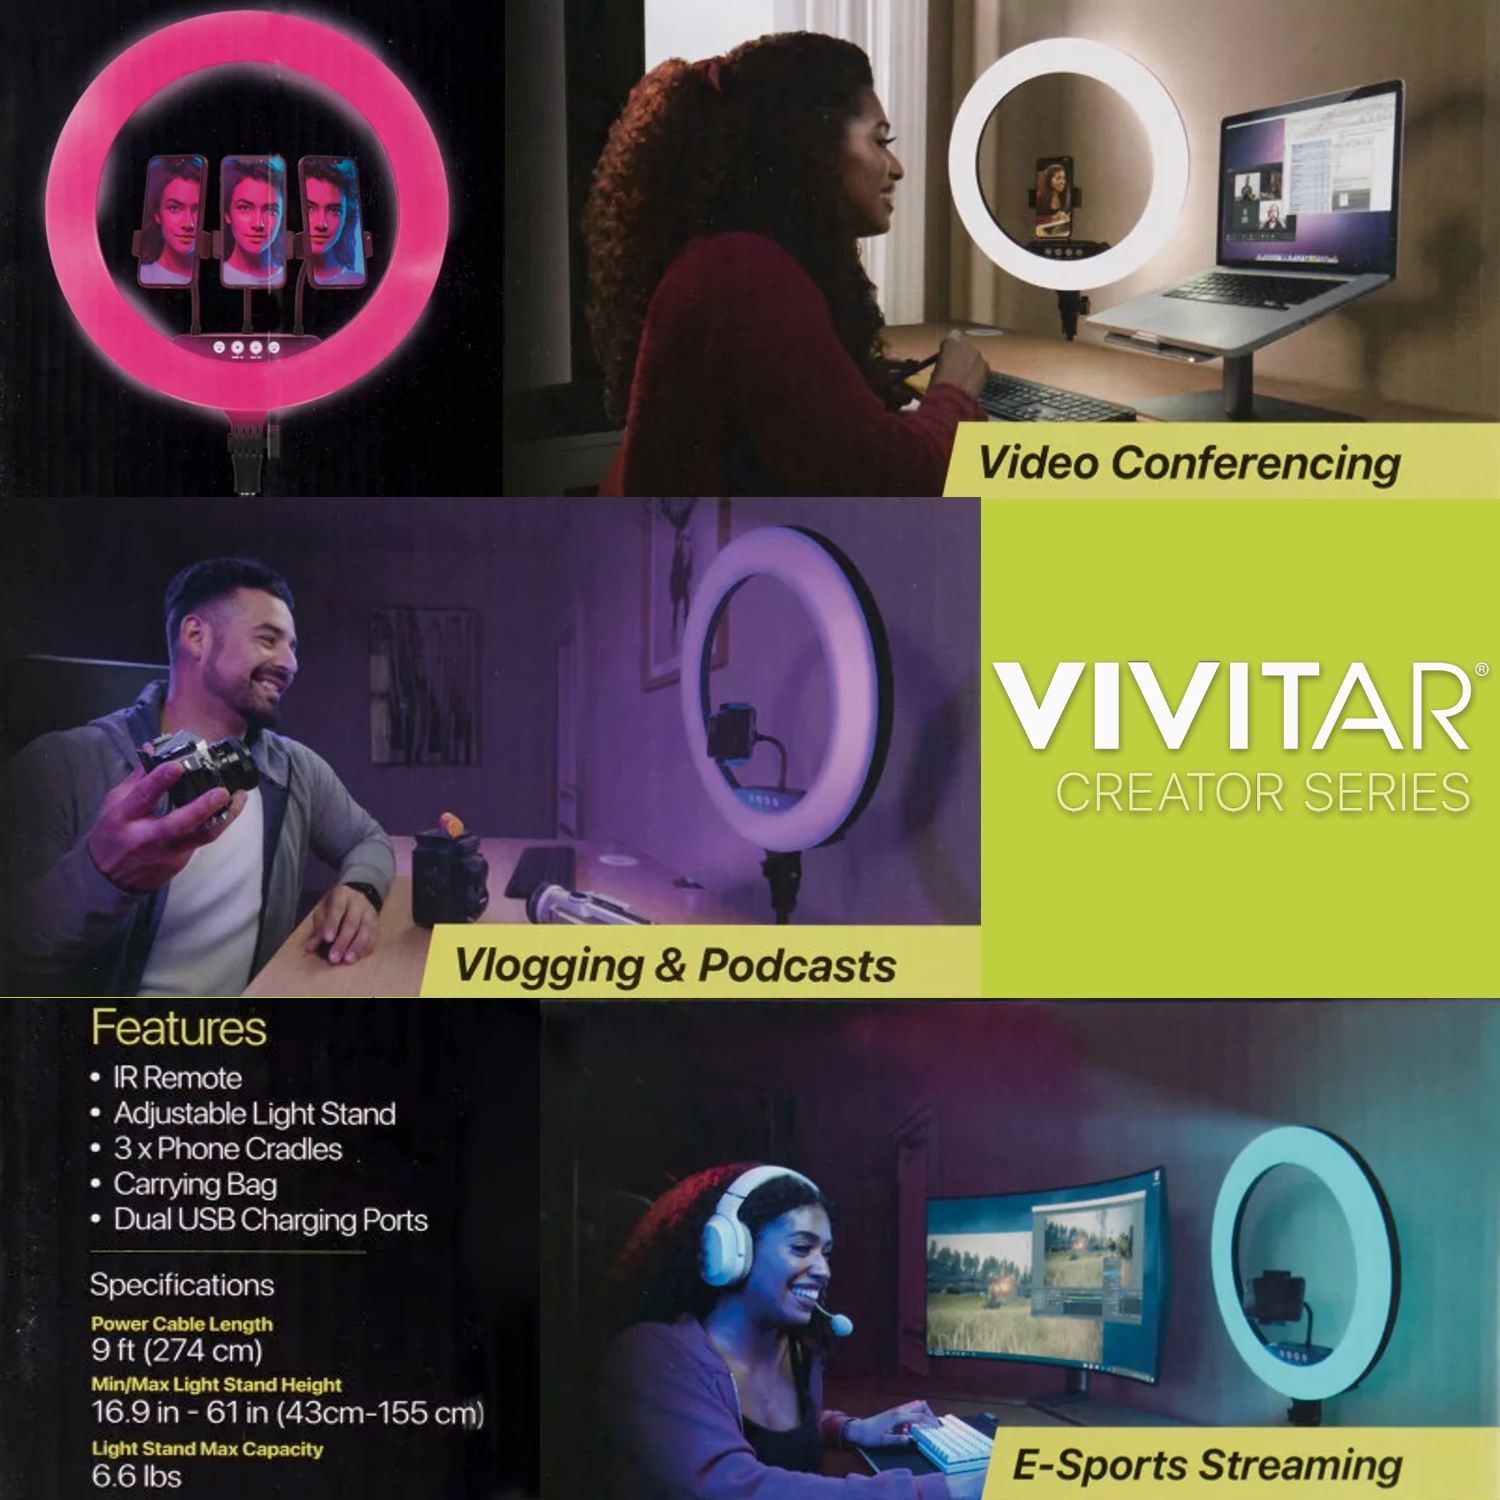 Vivitar 18" LED RGB Ring Light with Tripod, Phone Holder USB Charging Ports, and Wireless Remote - image 4 of 13